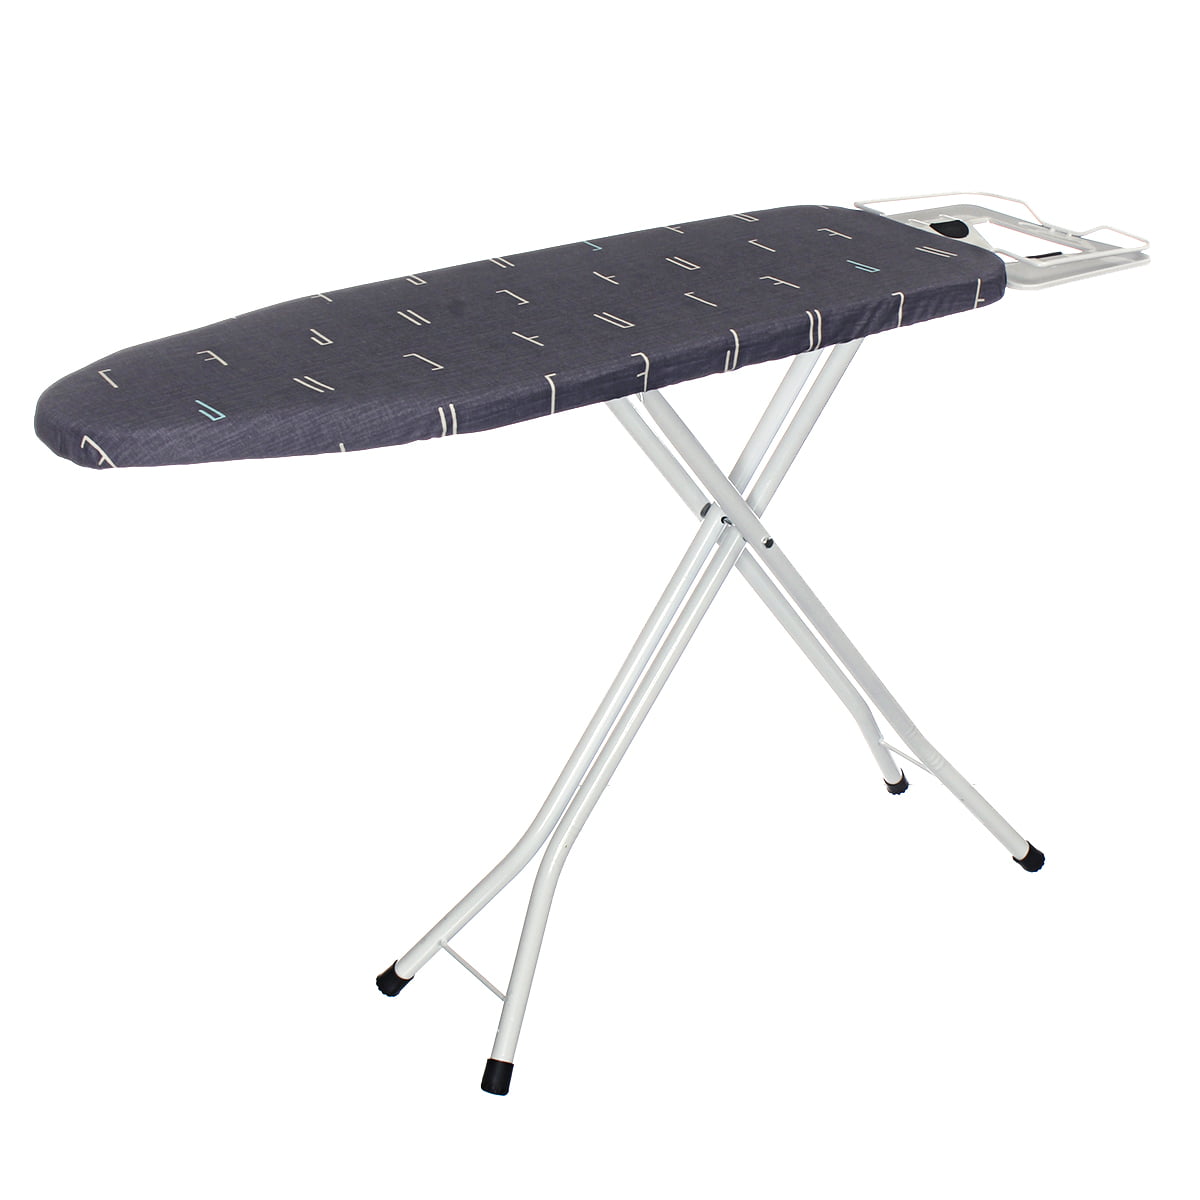 Details about   Folding Metal Ironing Board Vibrant Modern Cover Iron Rack Non Slip Foldable New 